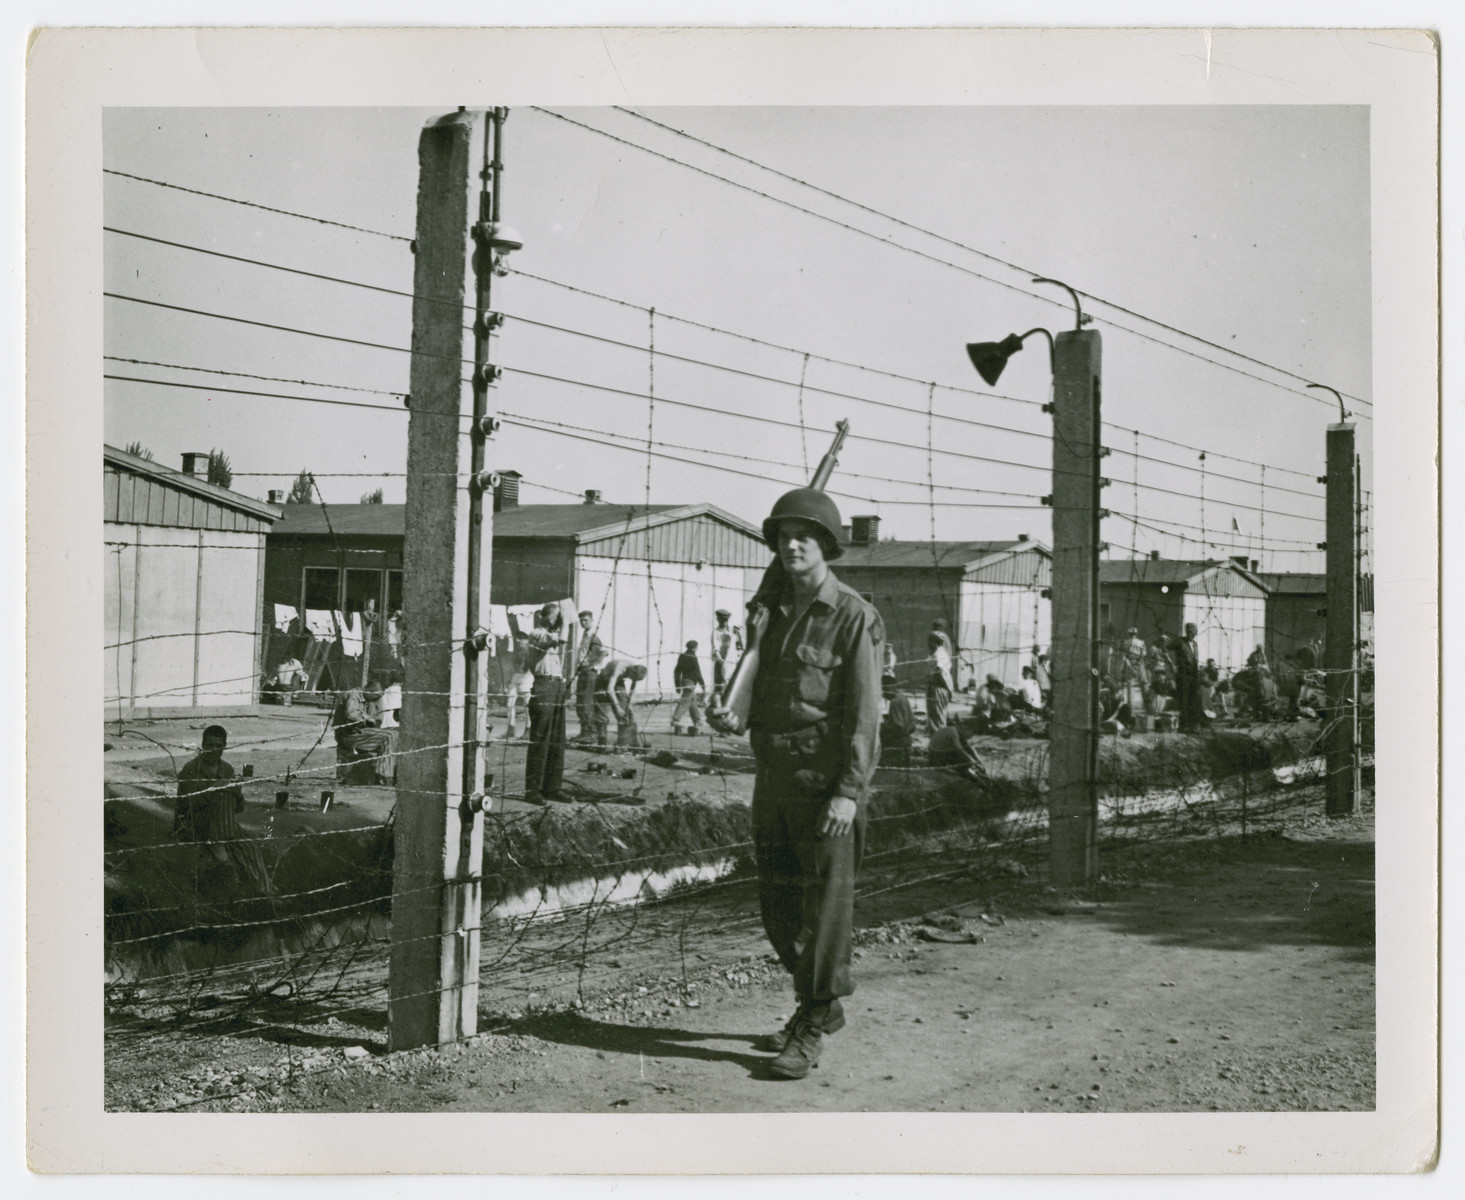 An American soldier guards the perimeter of the Dachau concentration camp.  Behind the fence are either survivors or captured Nazi war criminals.